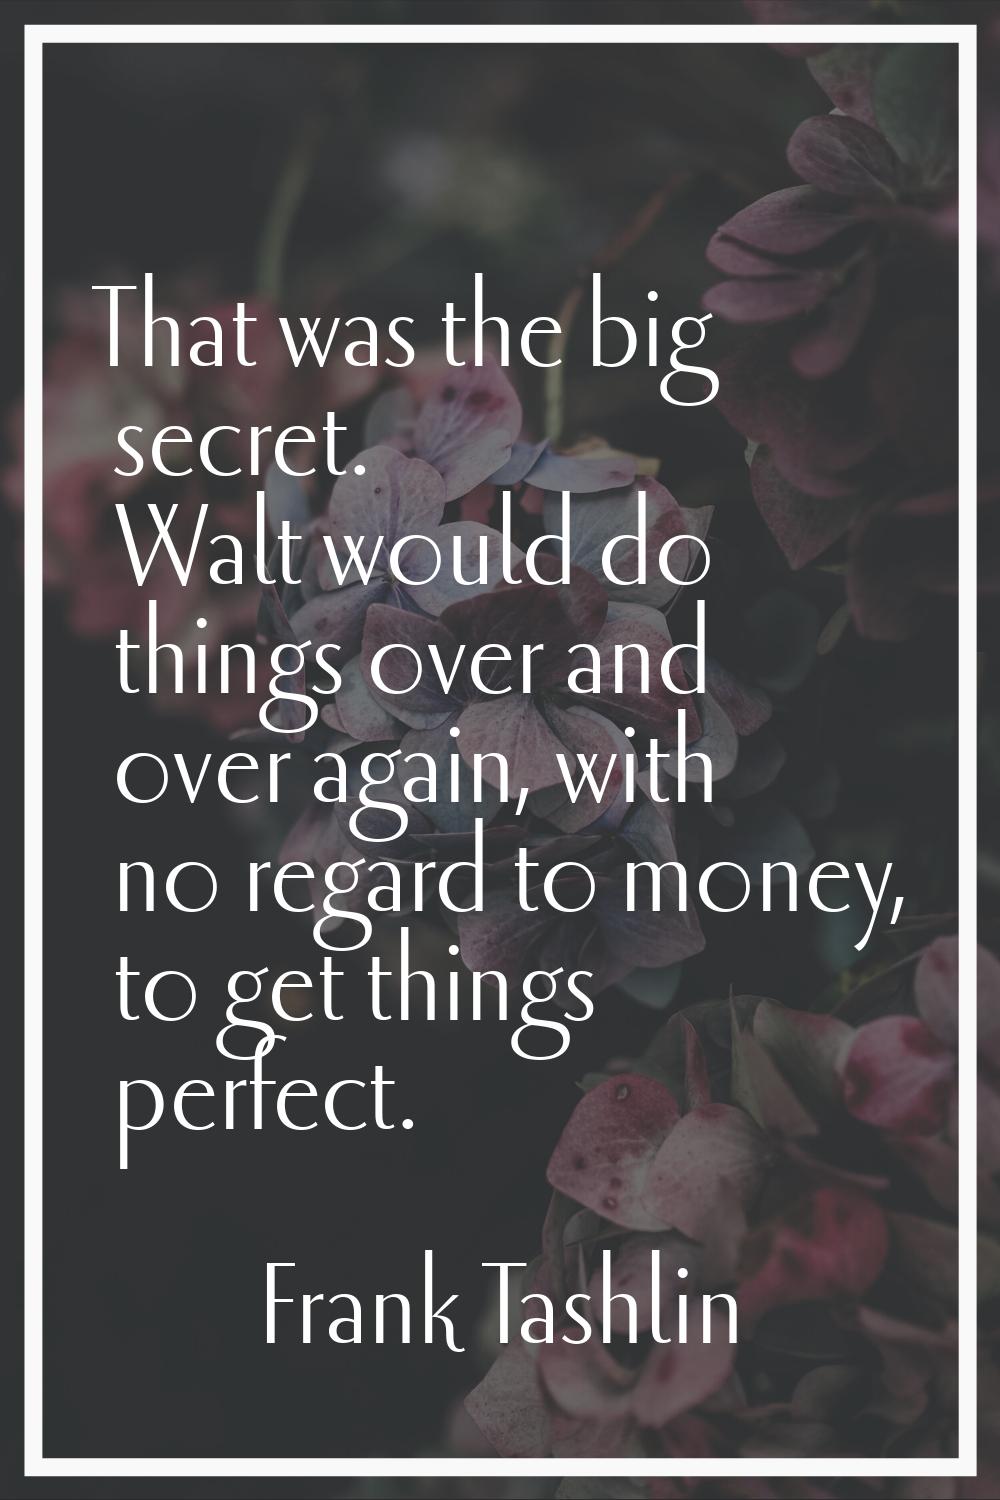 That was the big secret. Walt would do things over and over again, with no regard to money, to get 